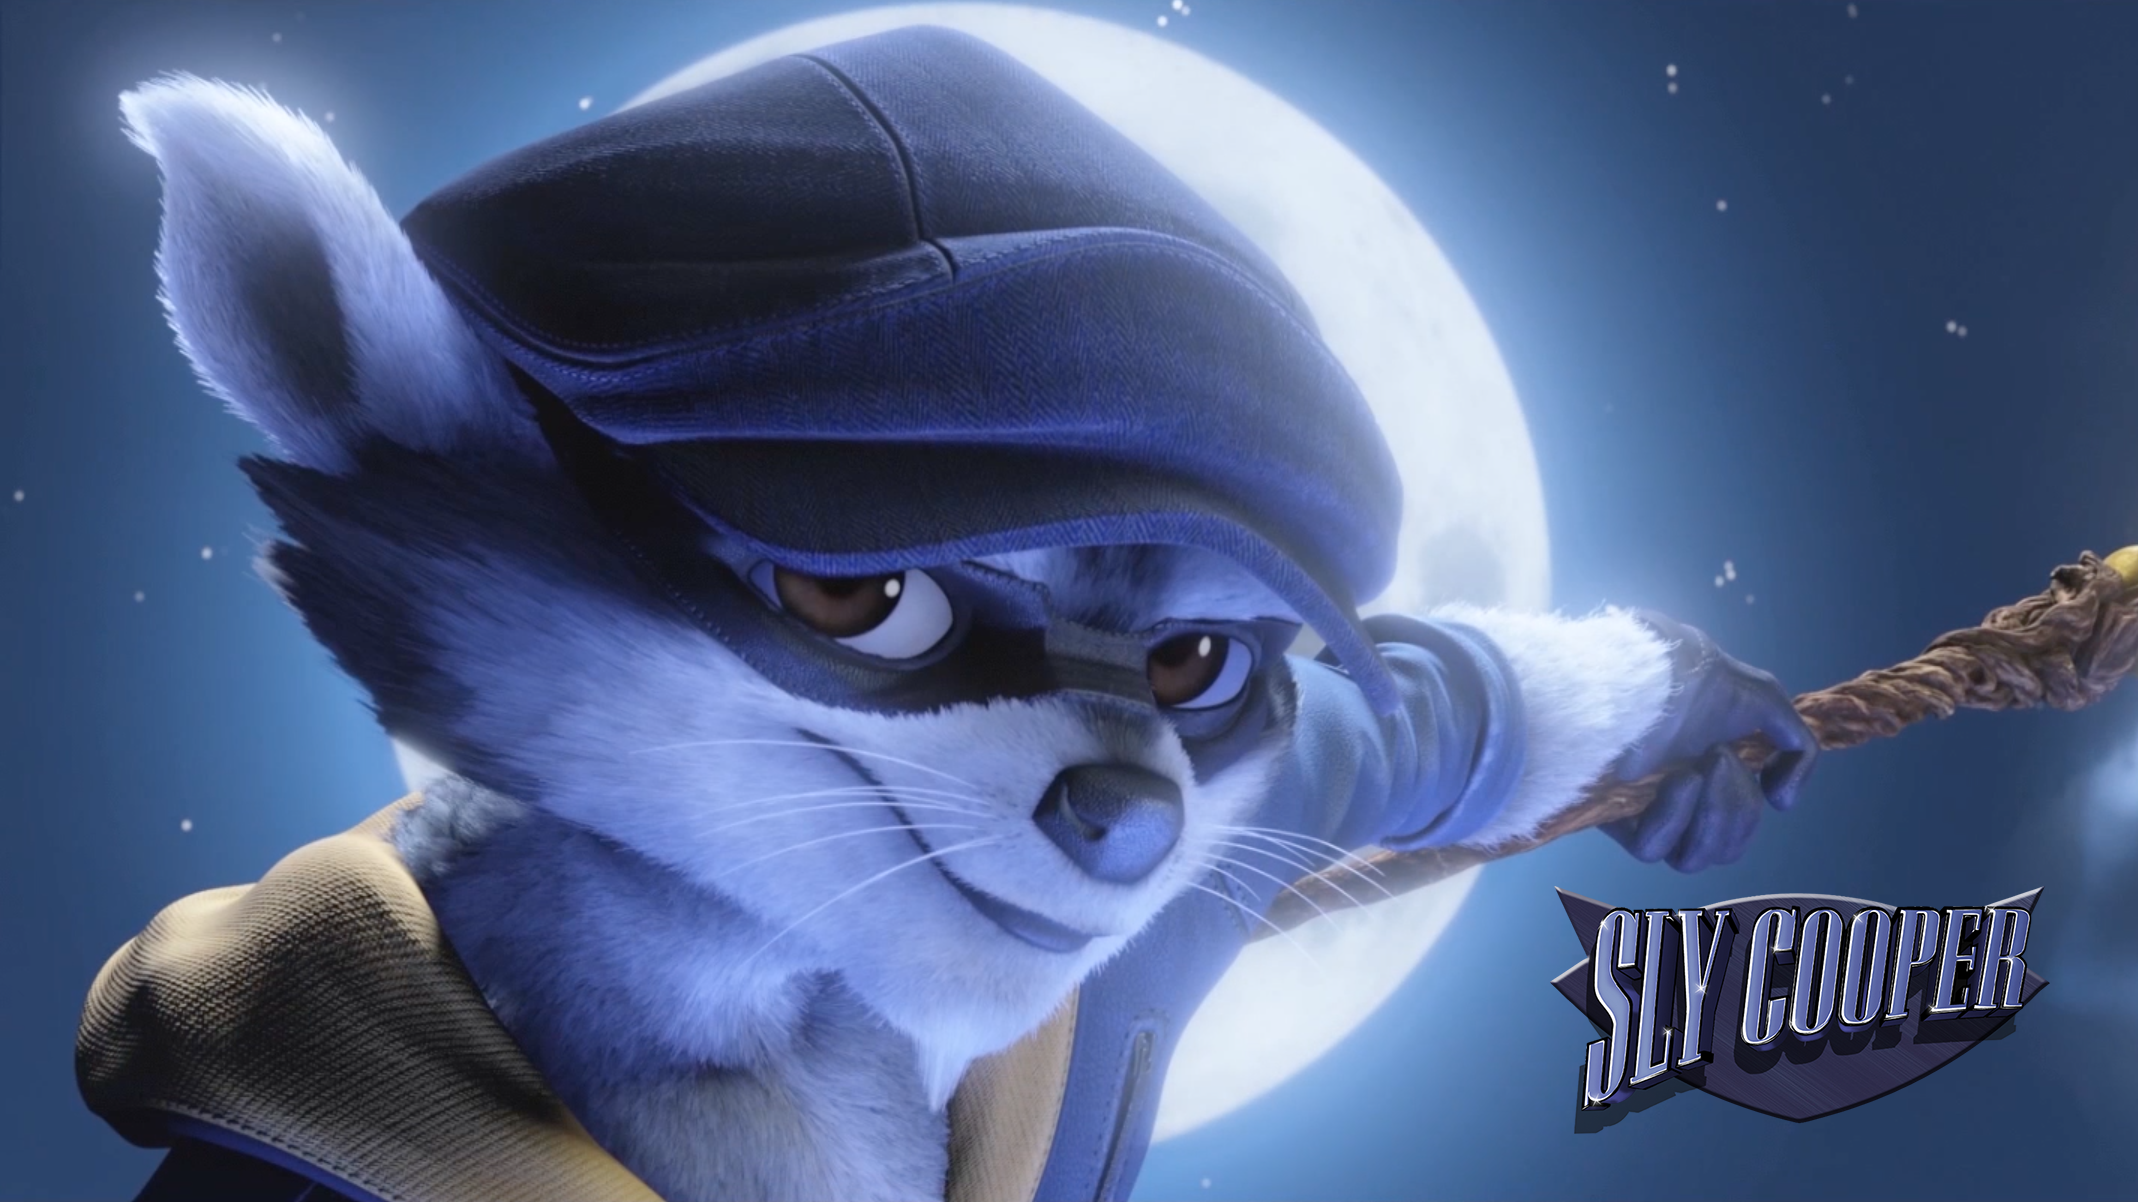 real ages of video game characters - Sly Cooper